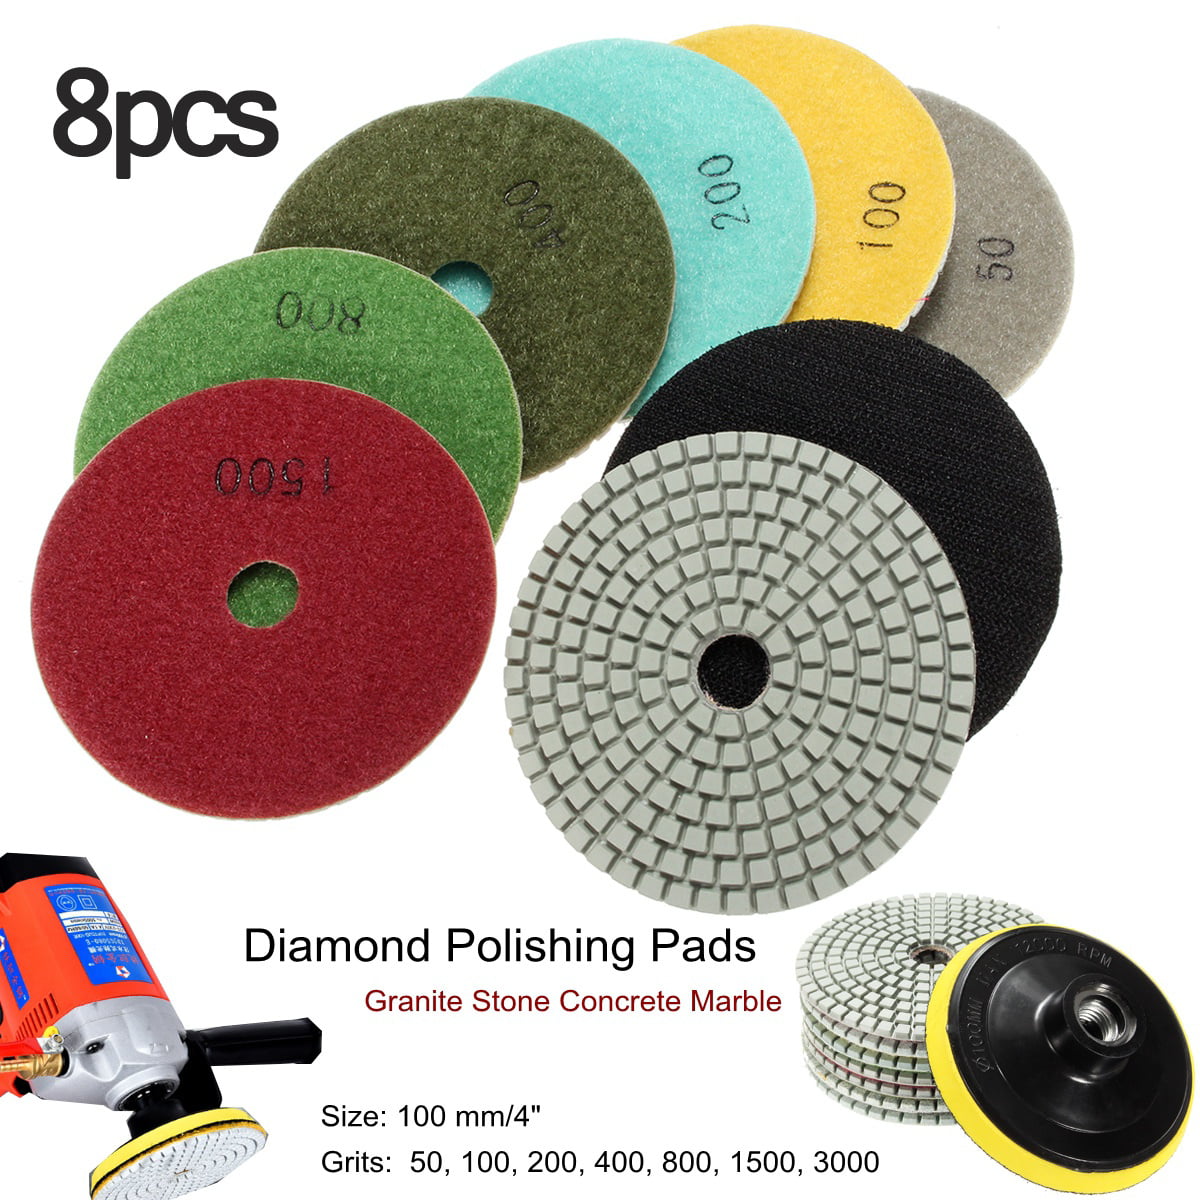 Details about   POLISHING PADS Wet Dry Loop Backer Pad Granite Stone 12 Pack 4" TANZFROSCH 